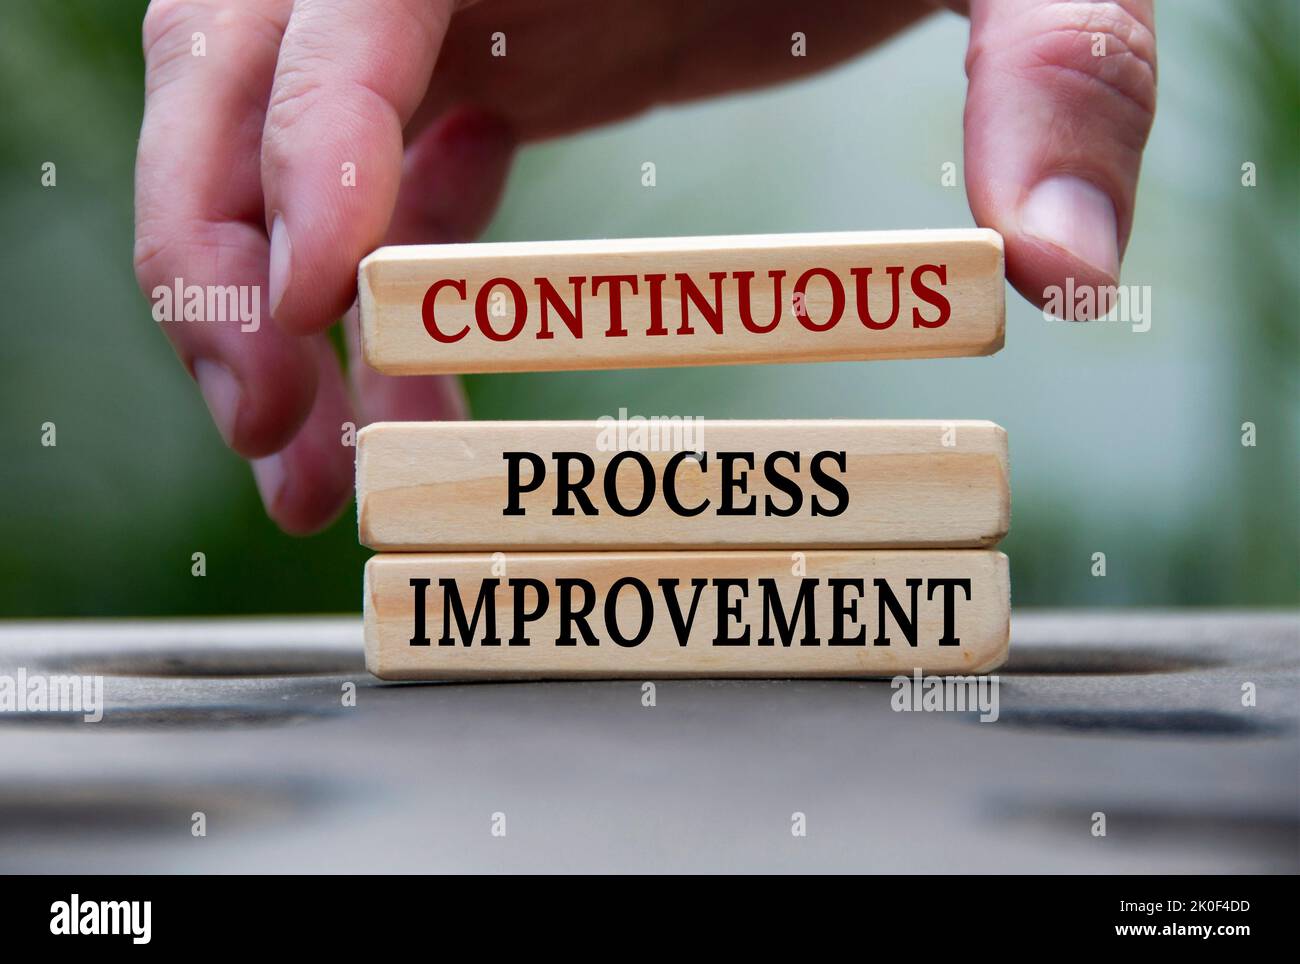 Continuous process improvement text on wooden blocks with blurred nature background. Process improvement and business concept. Stock Photo